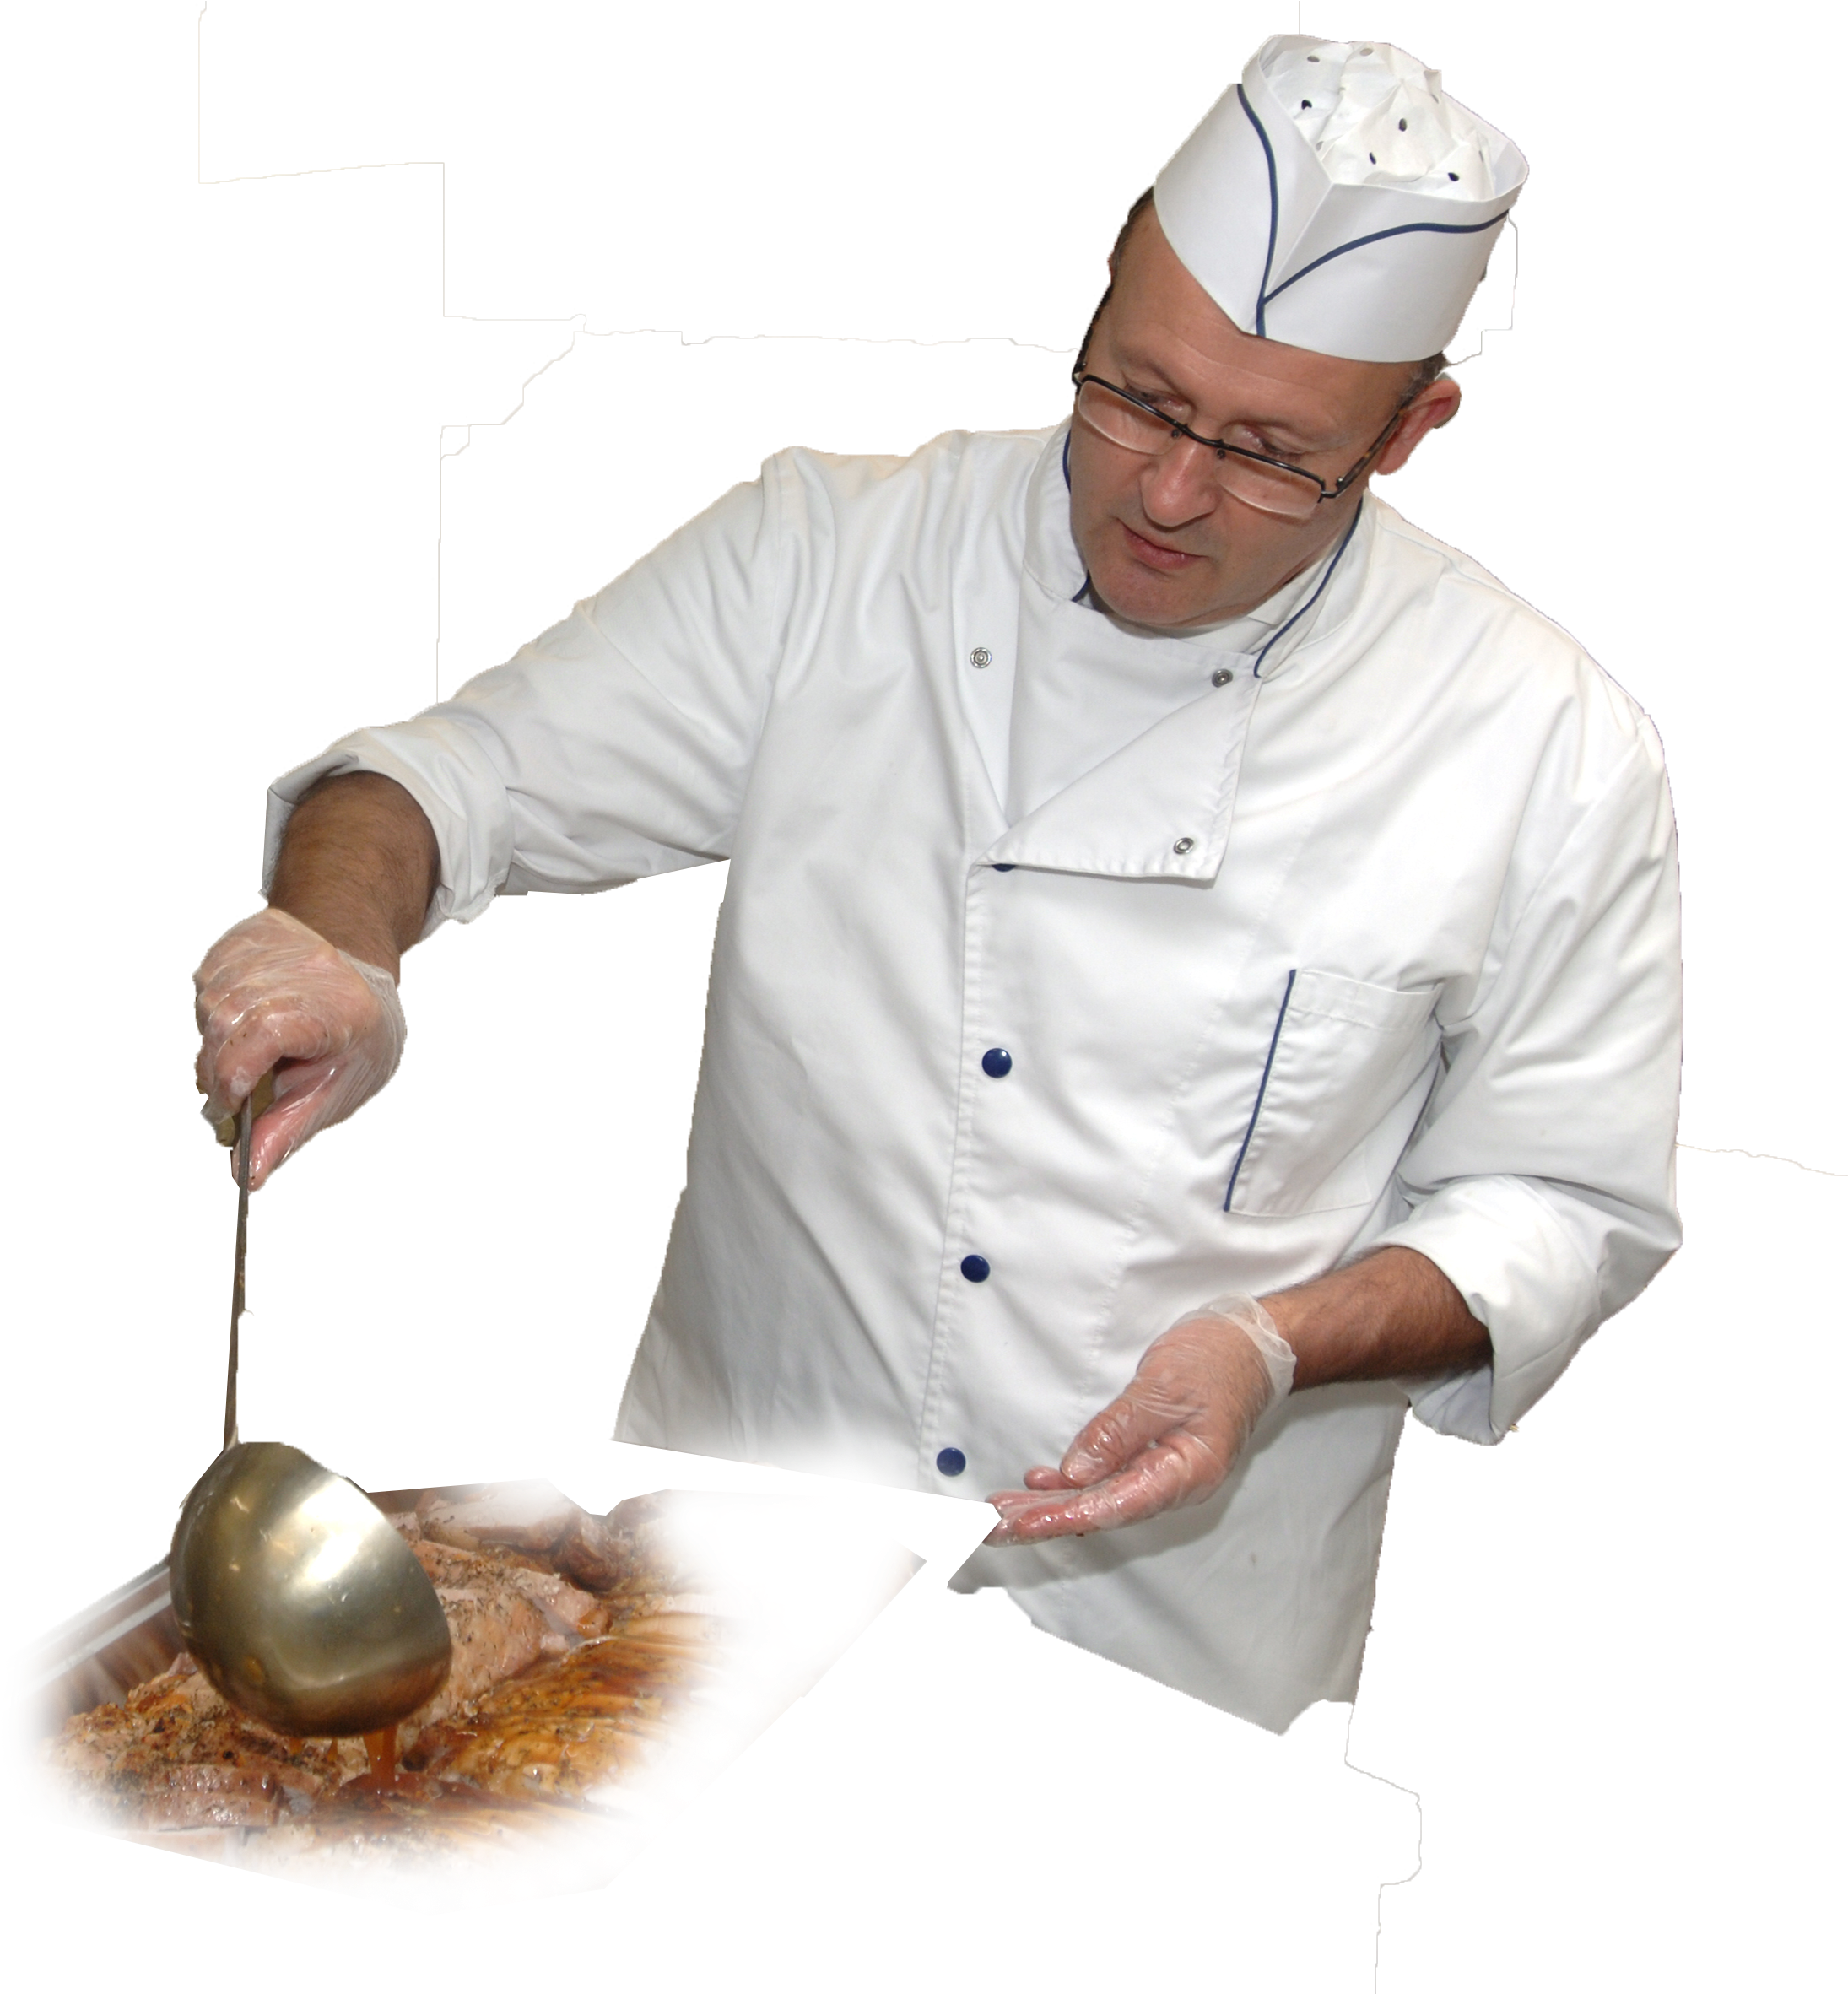 A Man In A Chef's Uniform Cooking